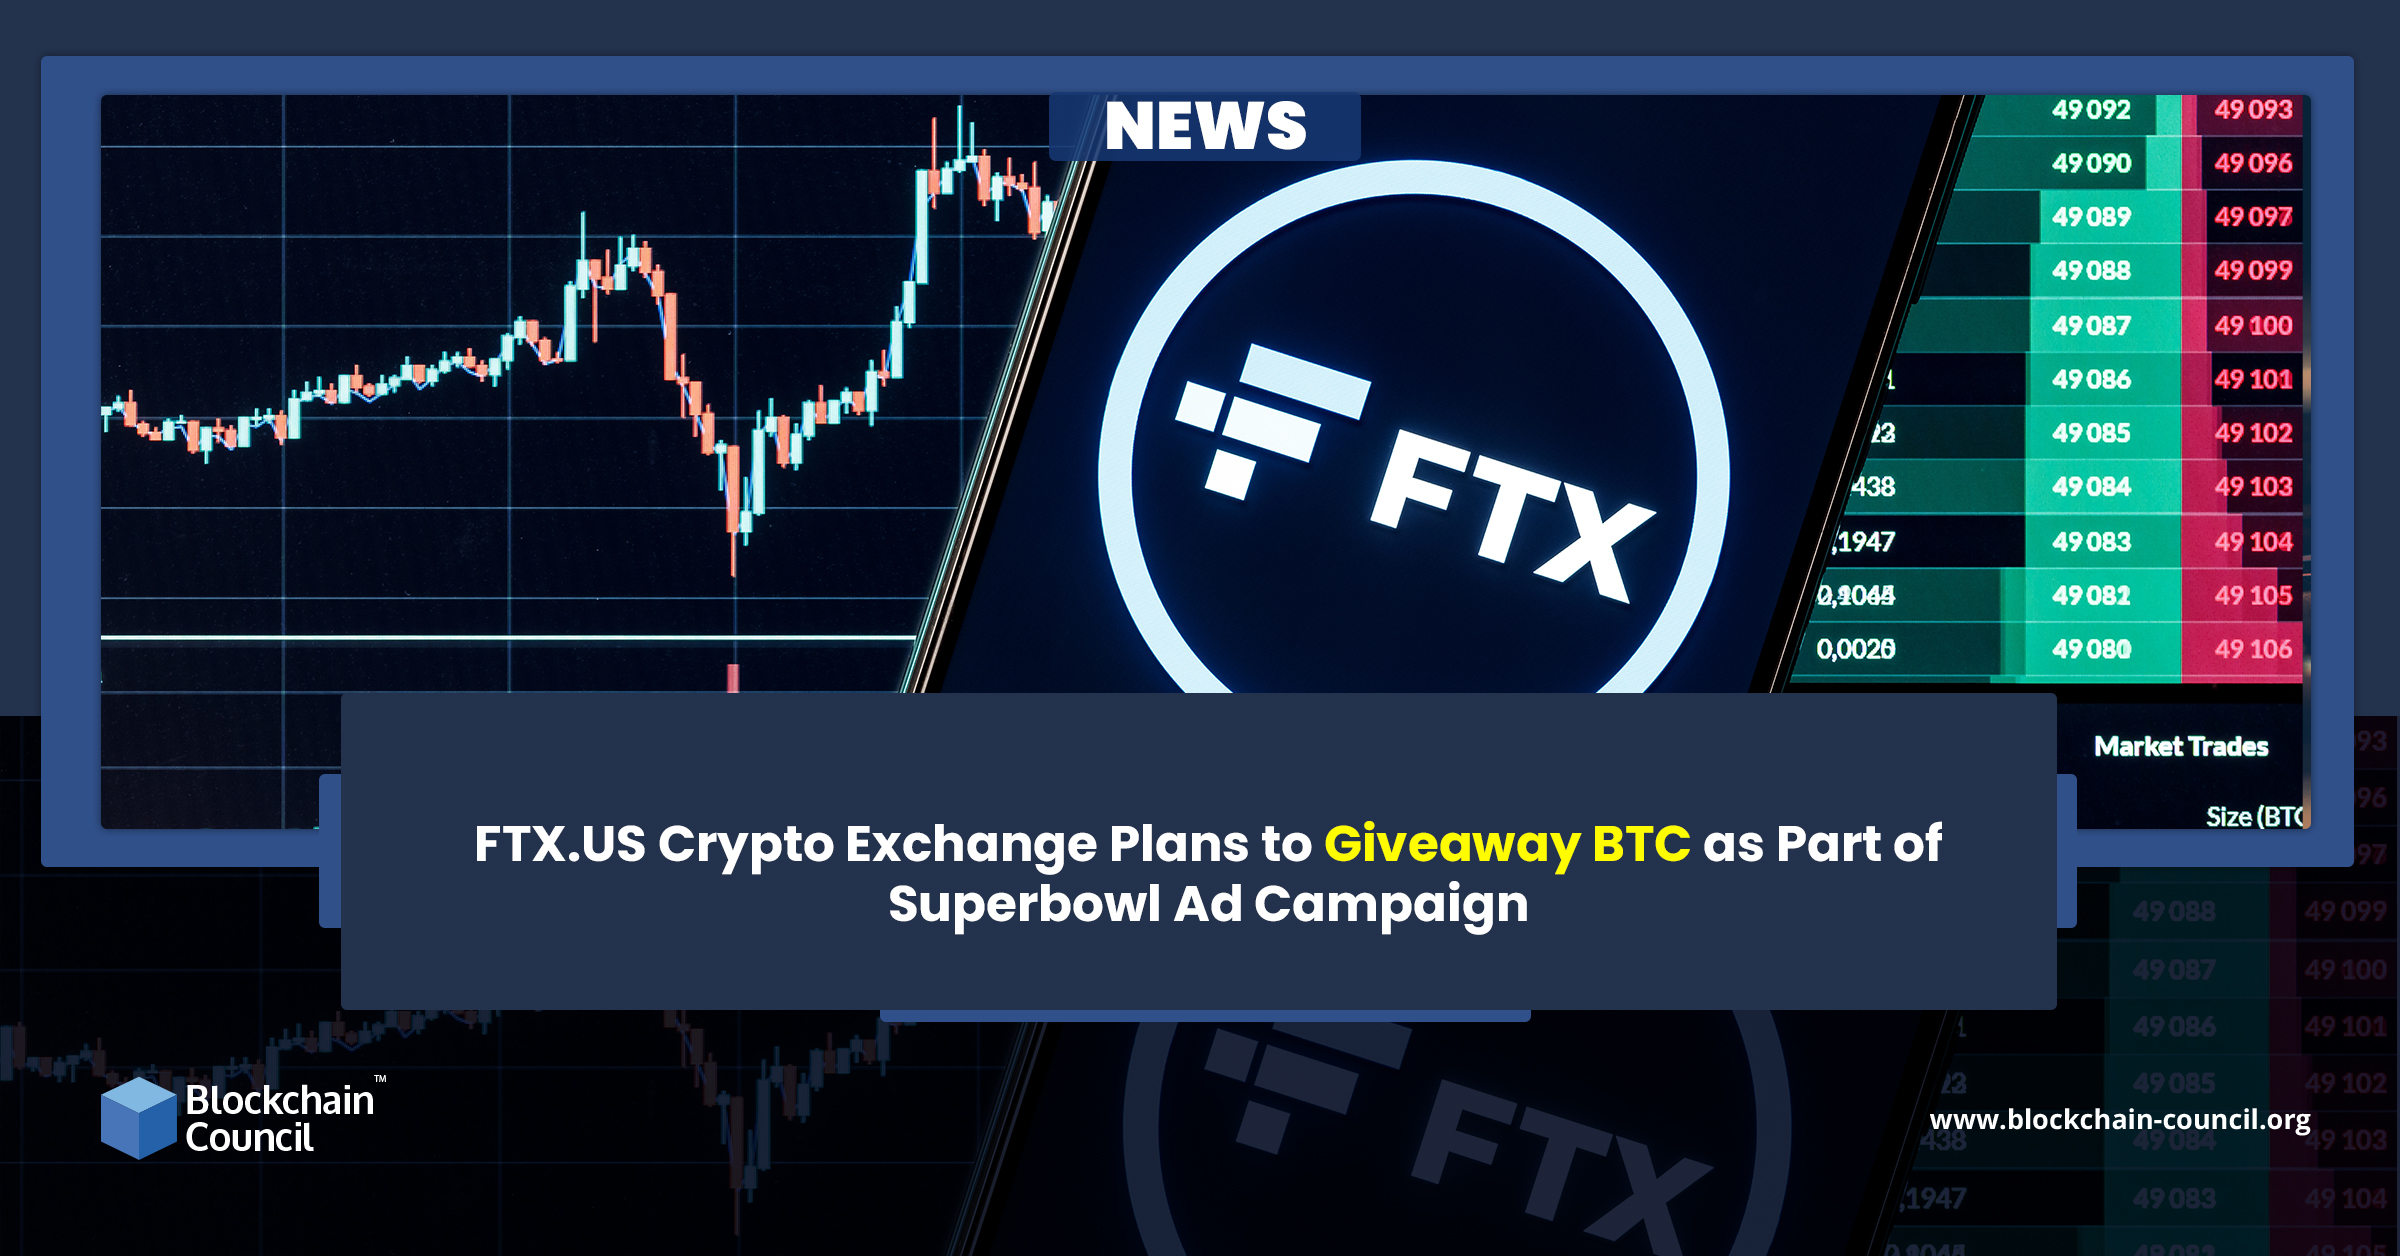 2 Cryptocurrency Companies Purchased Ad Slots for 2022's Super Bowl –  Bitcoin News